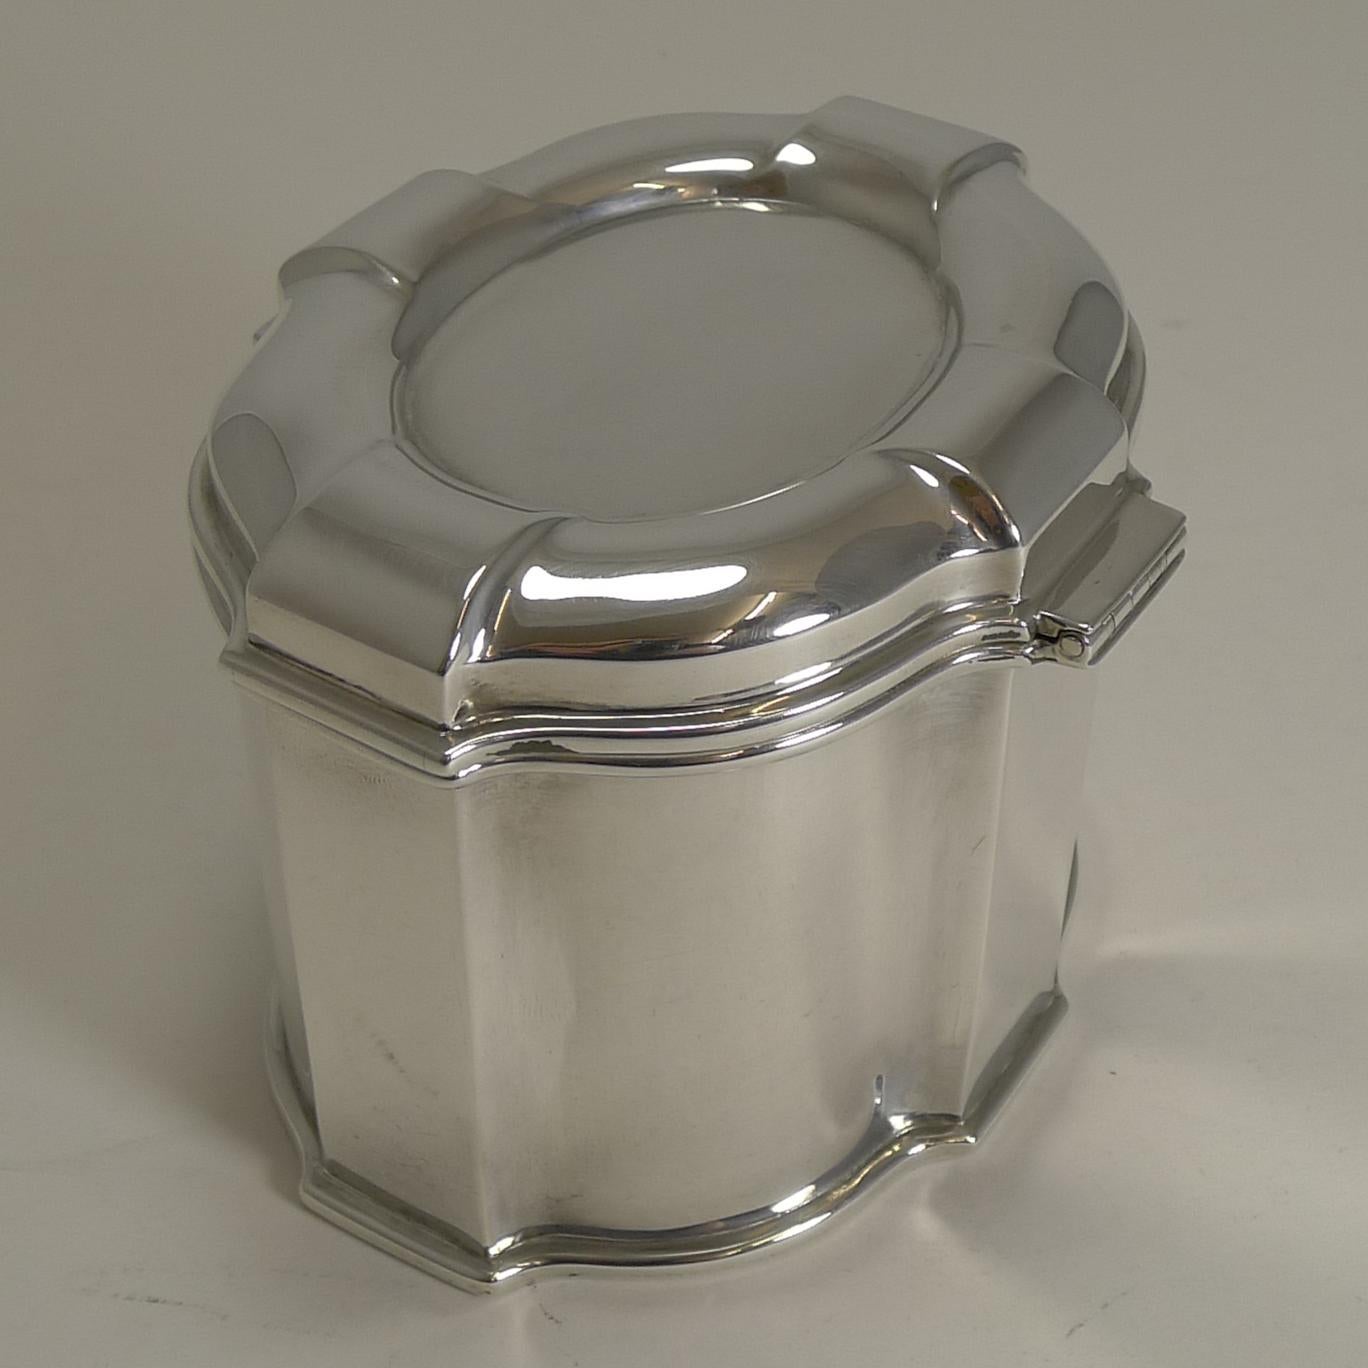 Early 20th Century Antique English Sterling Silver Tea Caddy / Box, 1917